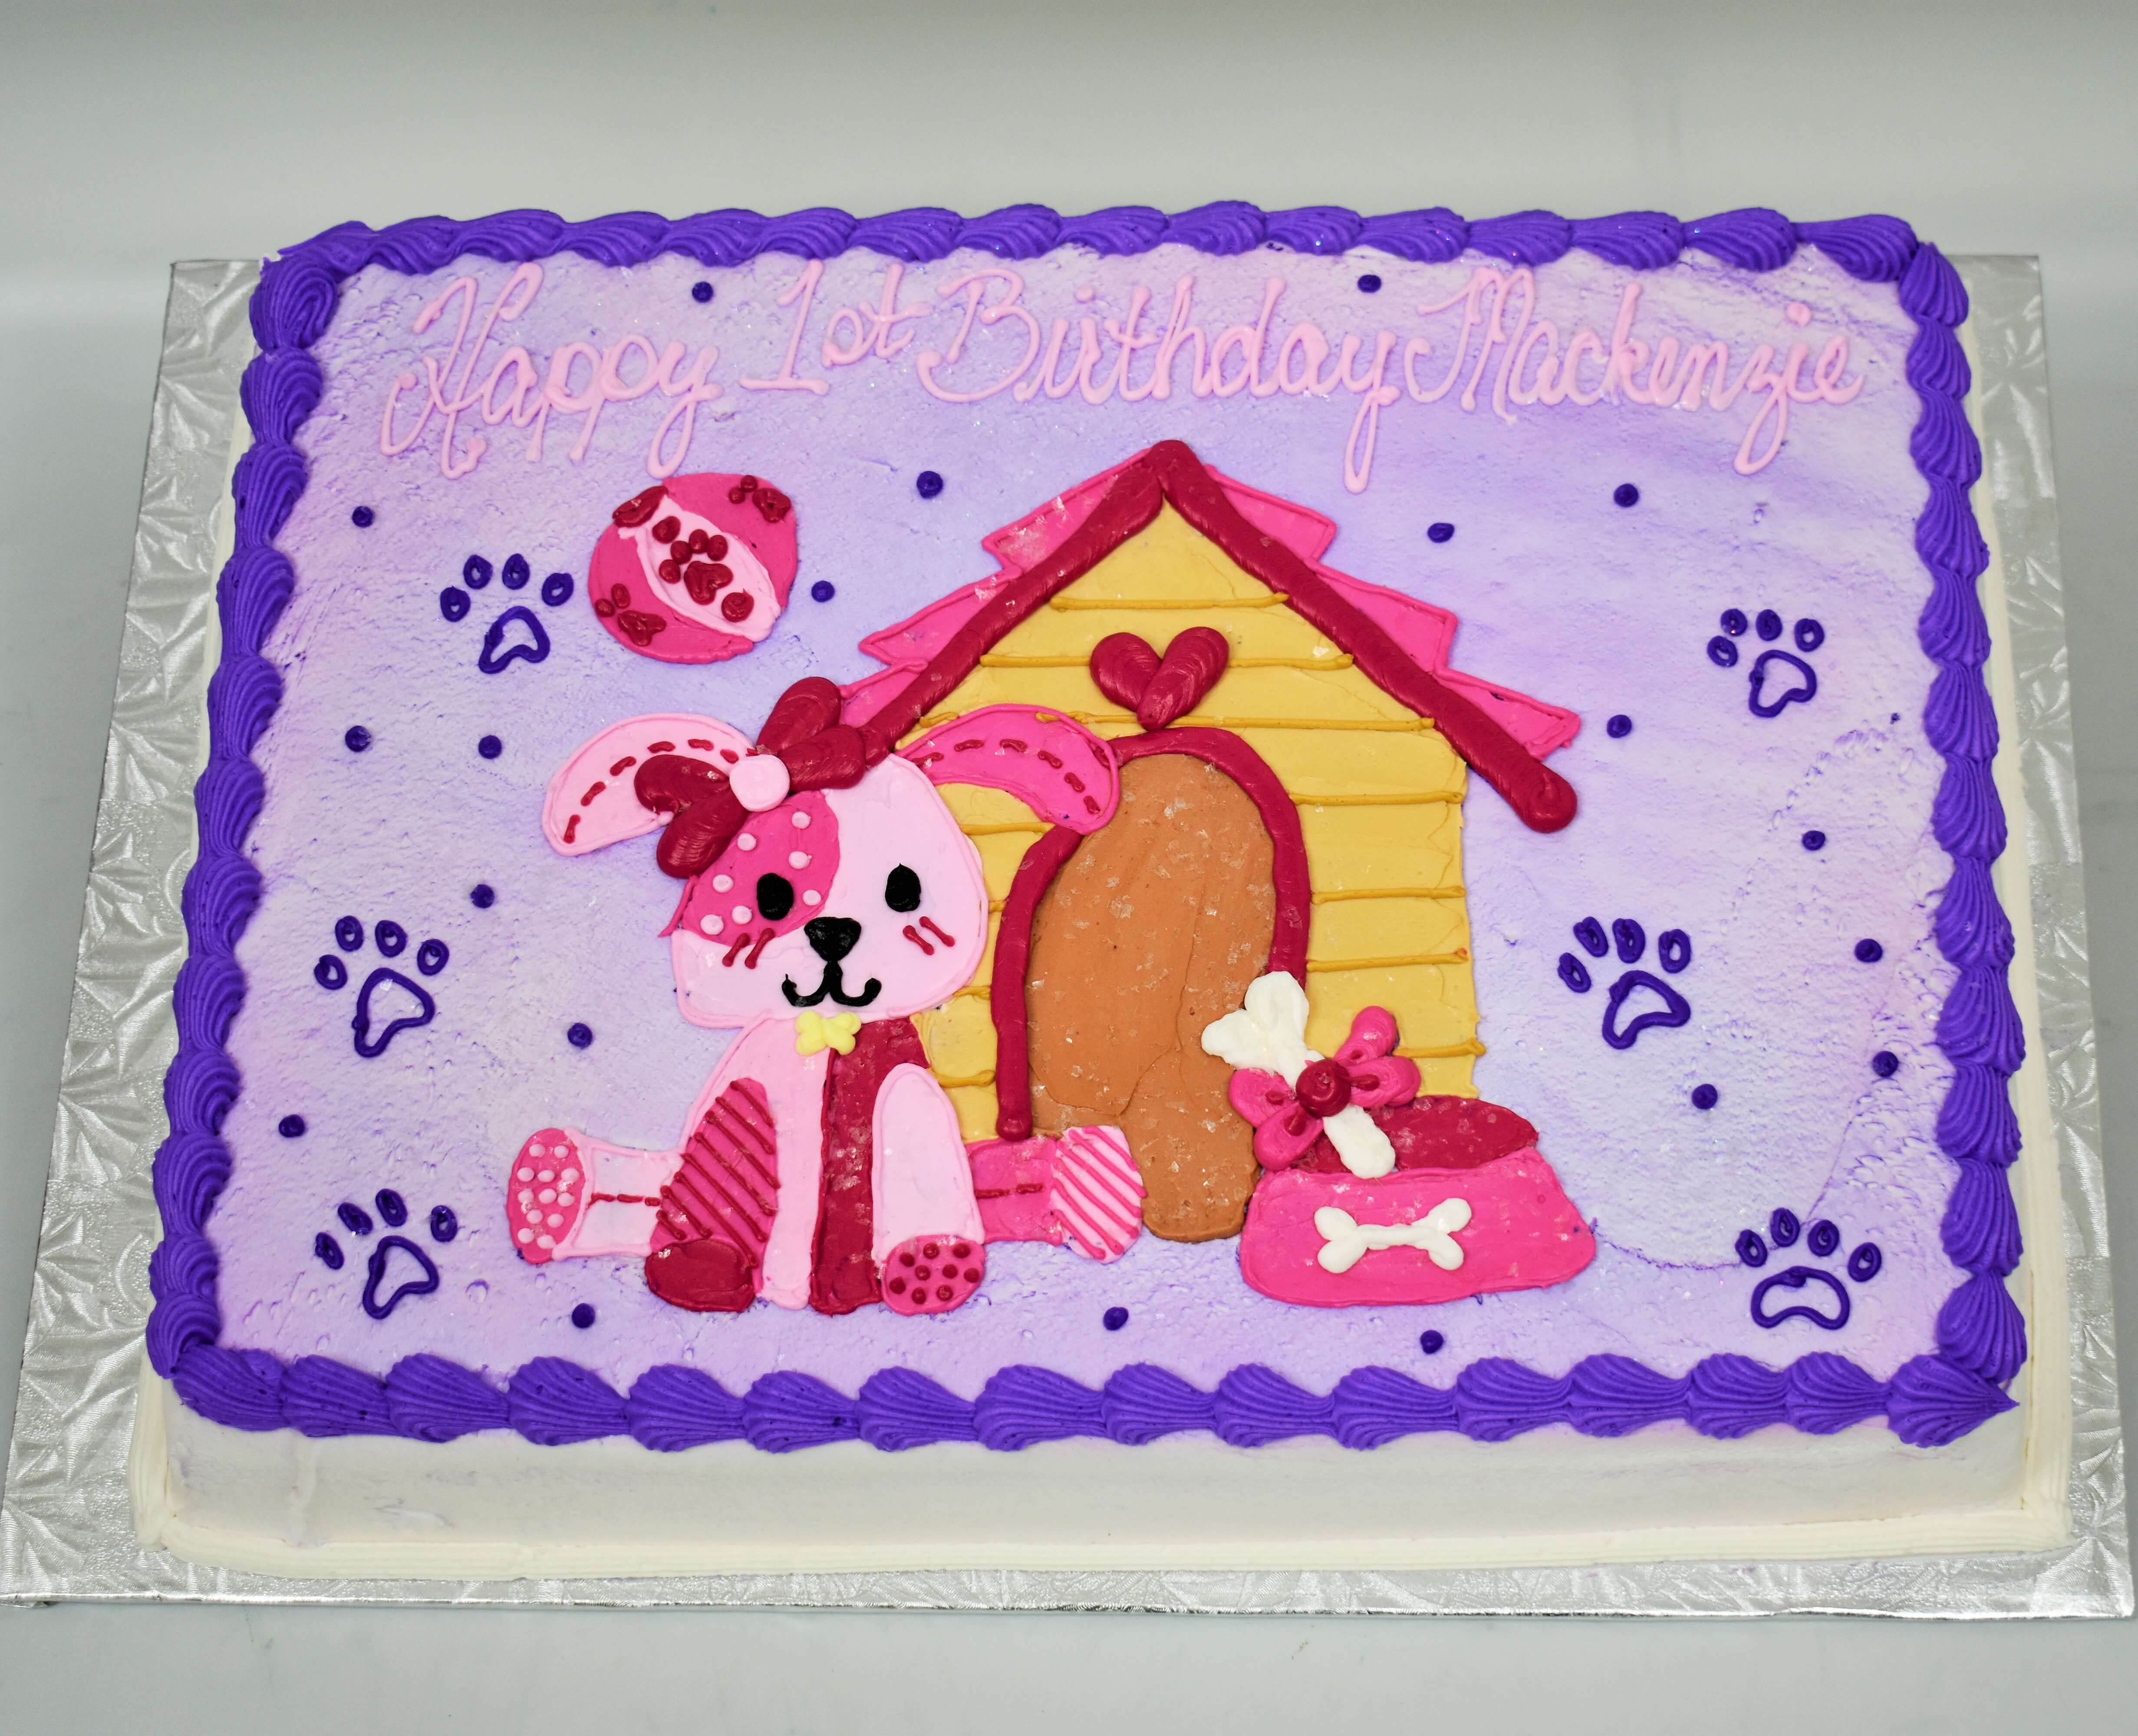 McArthur's Bakery Custom Cake with Dog, Patches, House, Paws, Dog Bowl, Purple, Pink